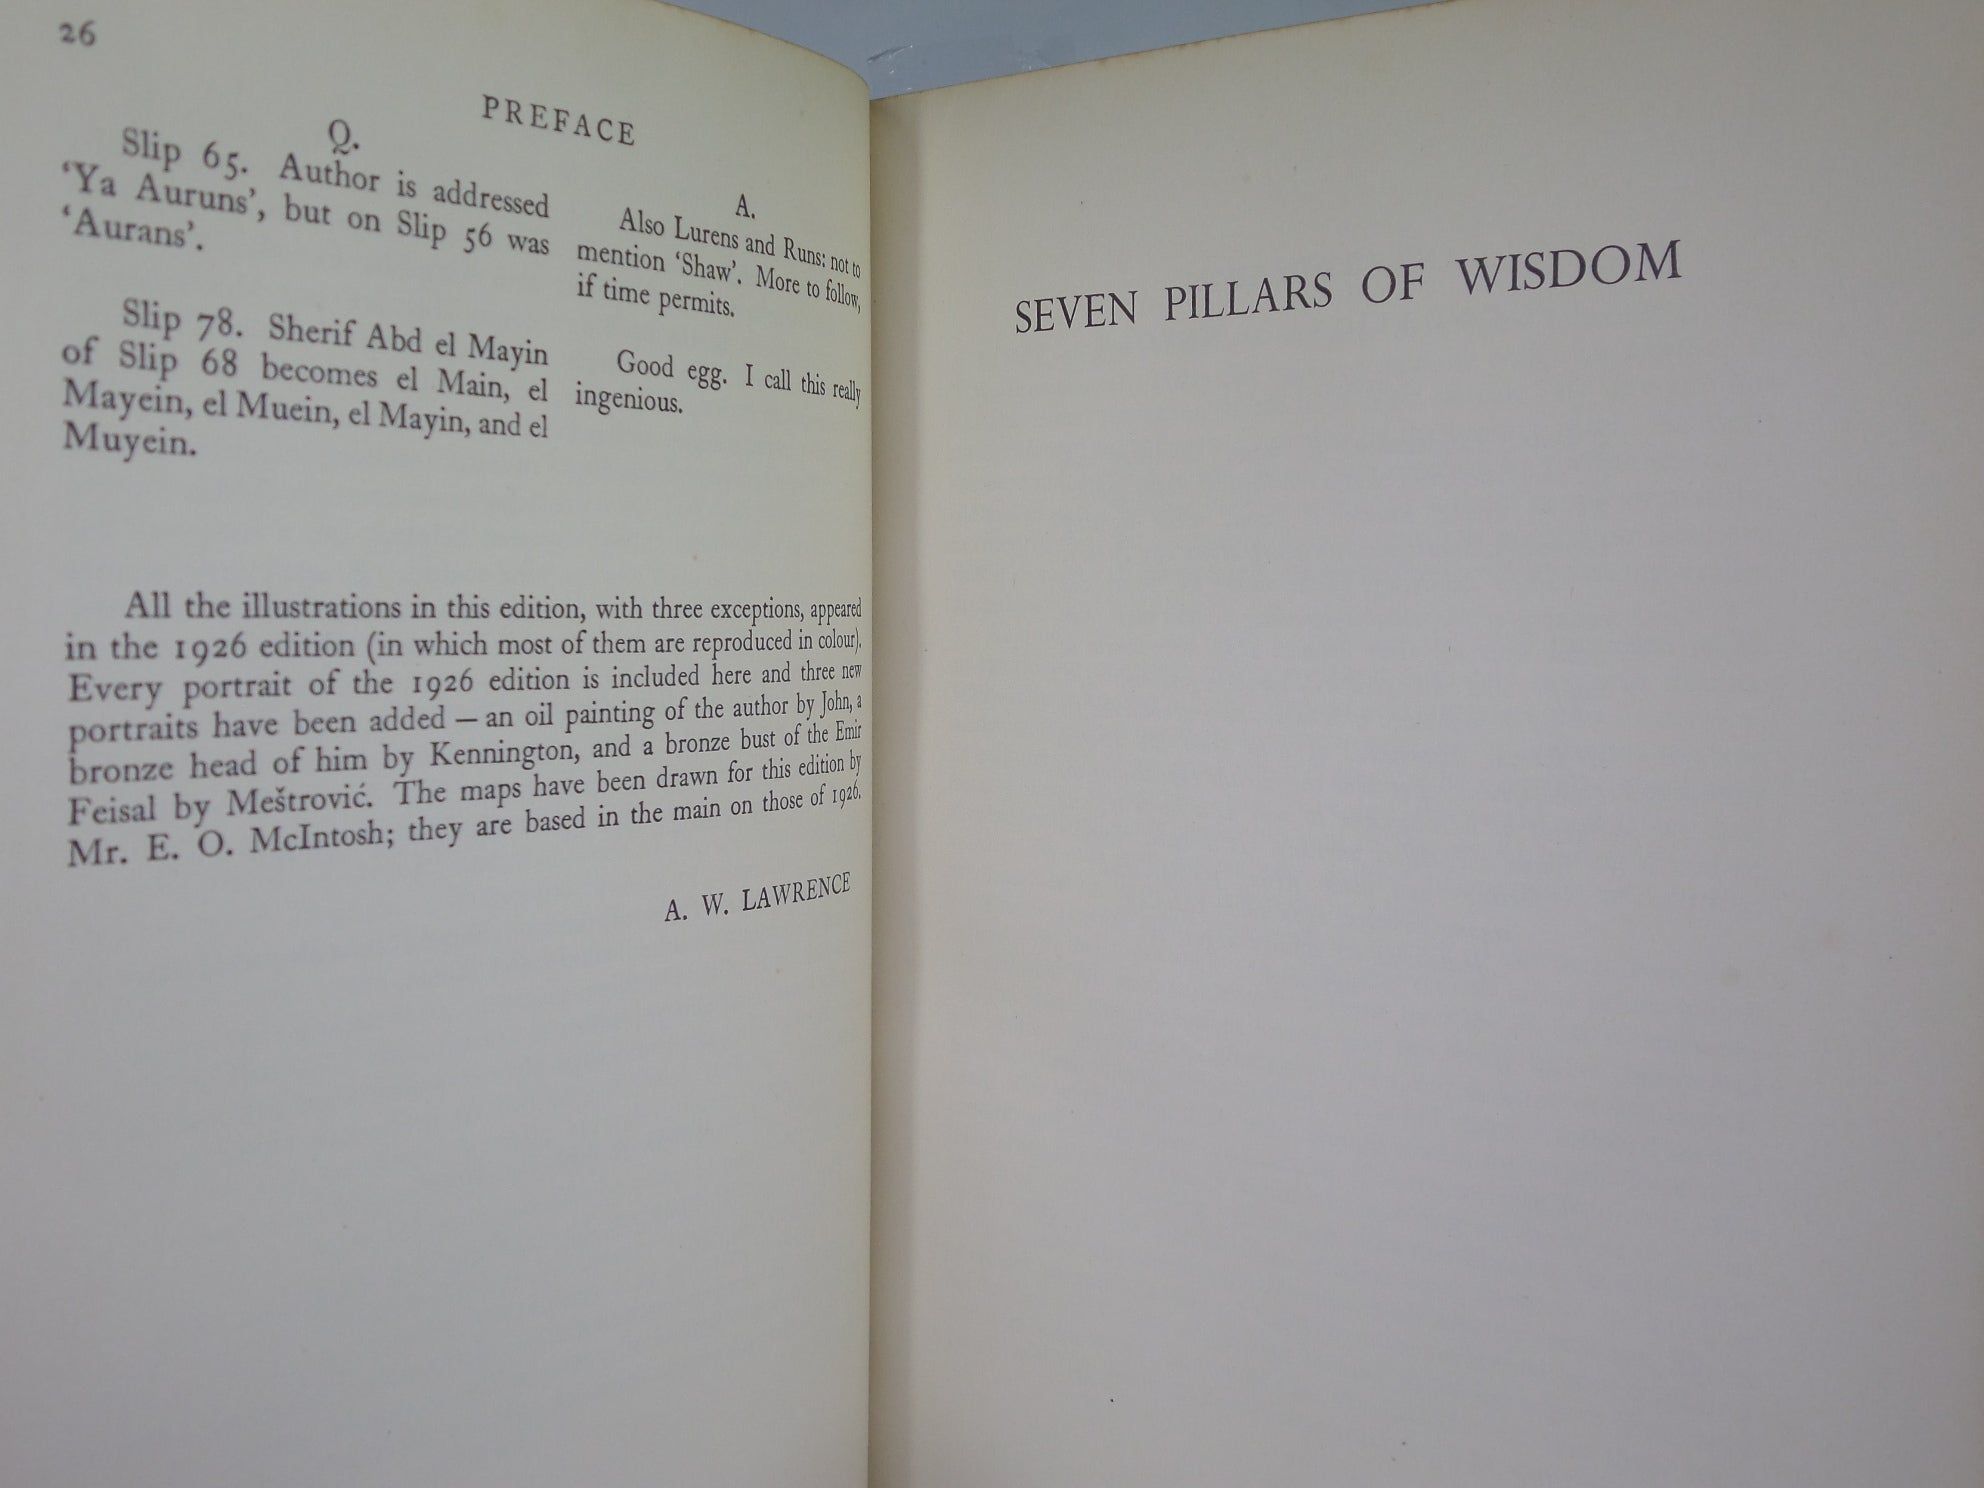 SEVEN PILLARS OF WISDOM BY T.E. LAWRENCE 1935 TREE CALF BINDING BY RIVIERE